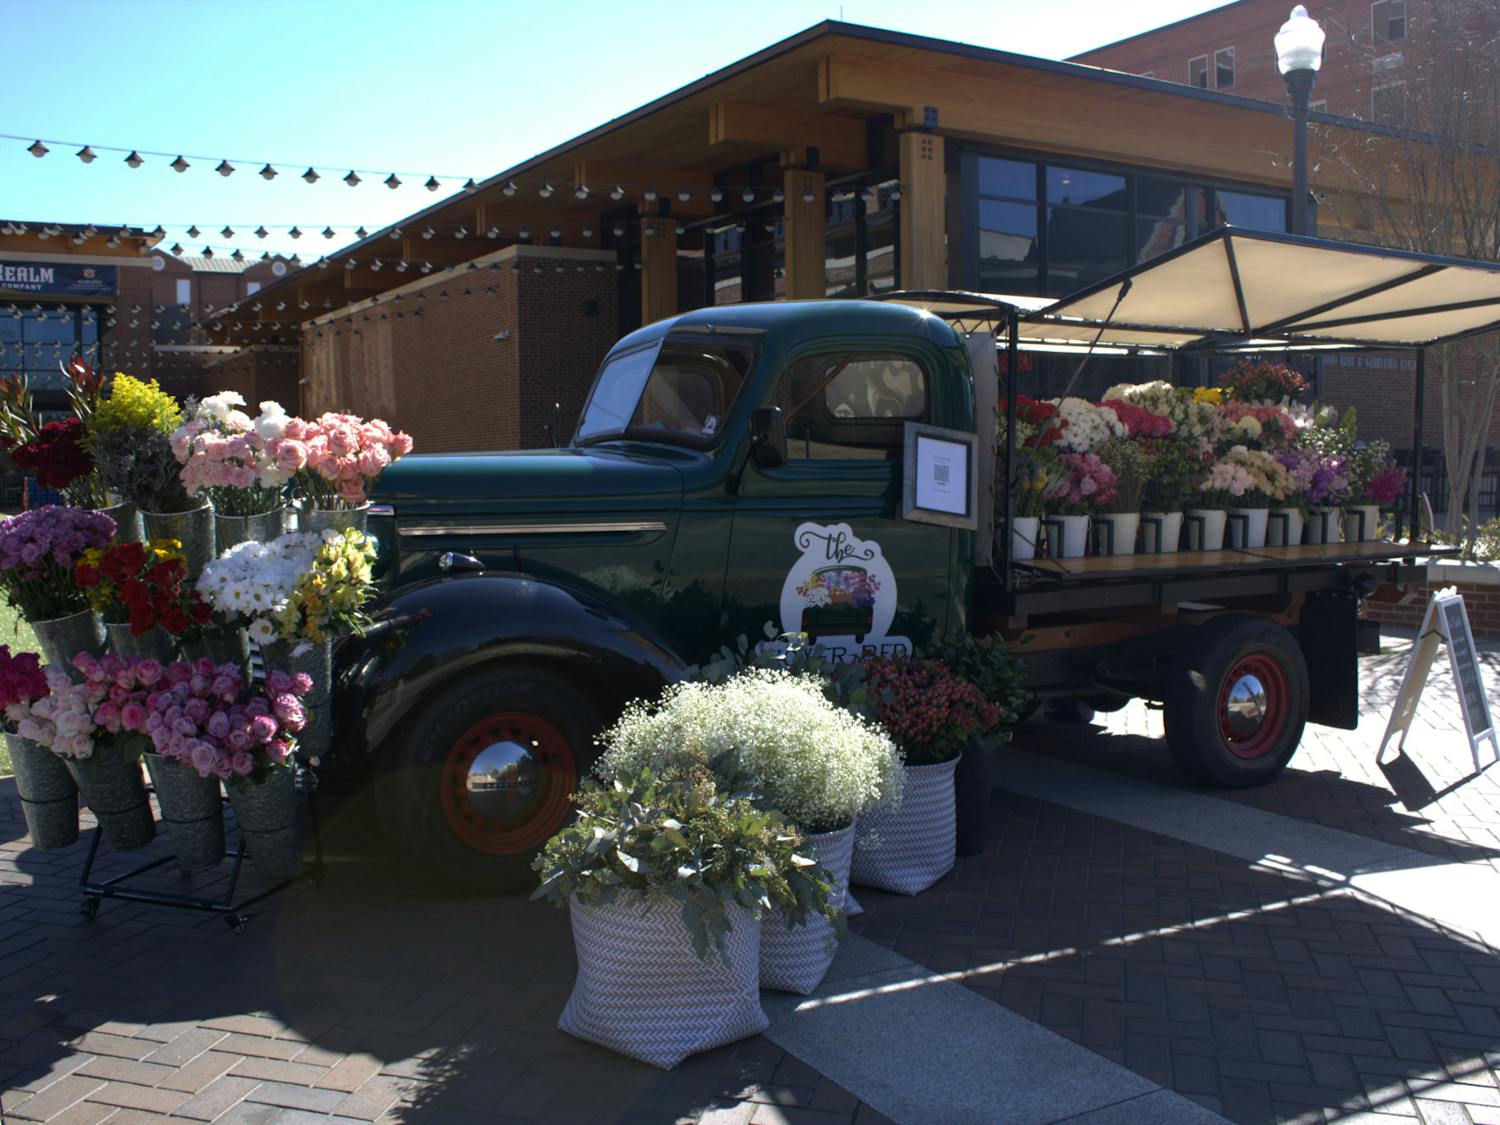 The Flower Truck at Hey Day Market